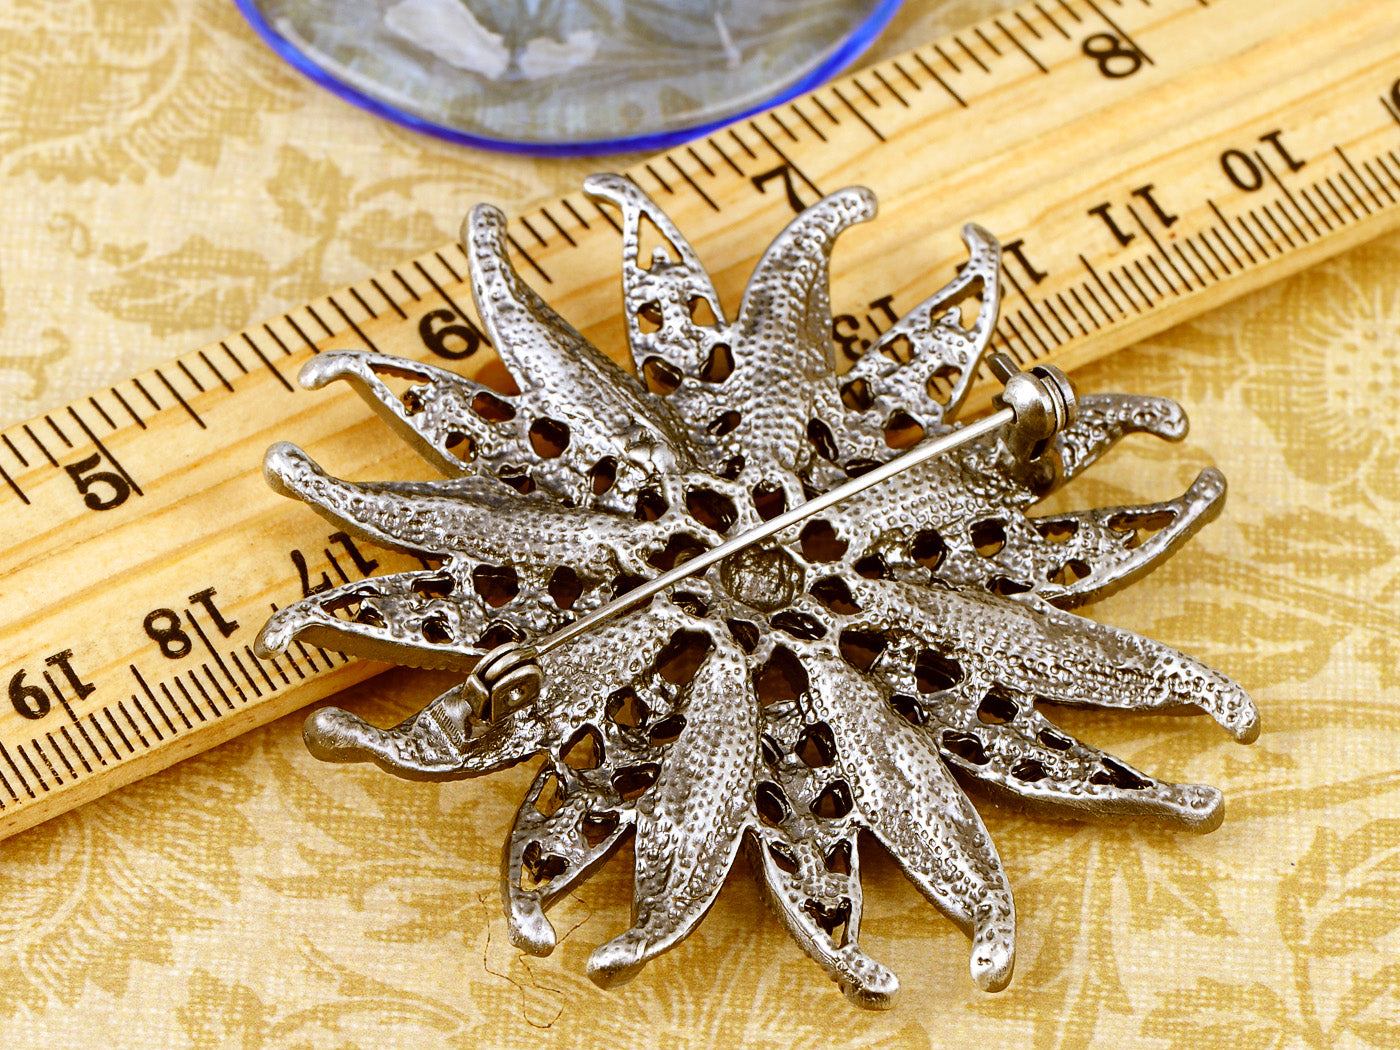 Elements Out Of This World Blue Poinsettia Flower Pin Brooch